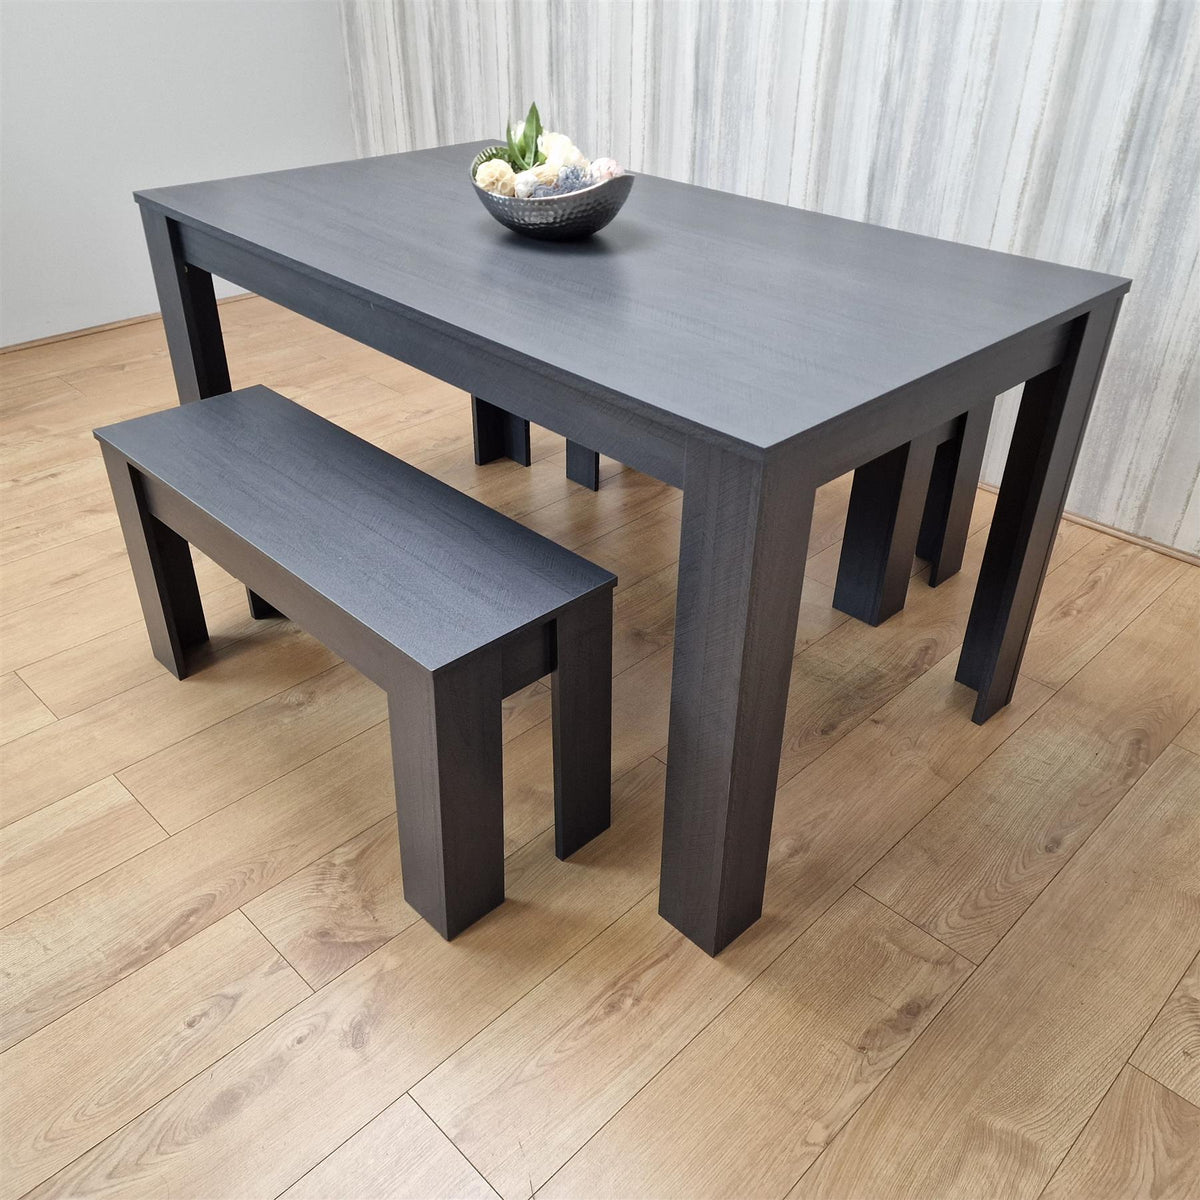 Dining Table Set with 2 Benches Dining Room and Kitchen table set of 2